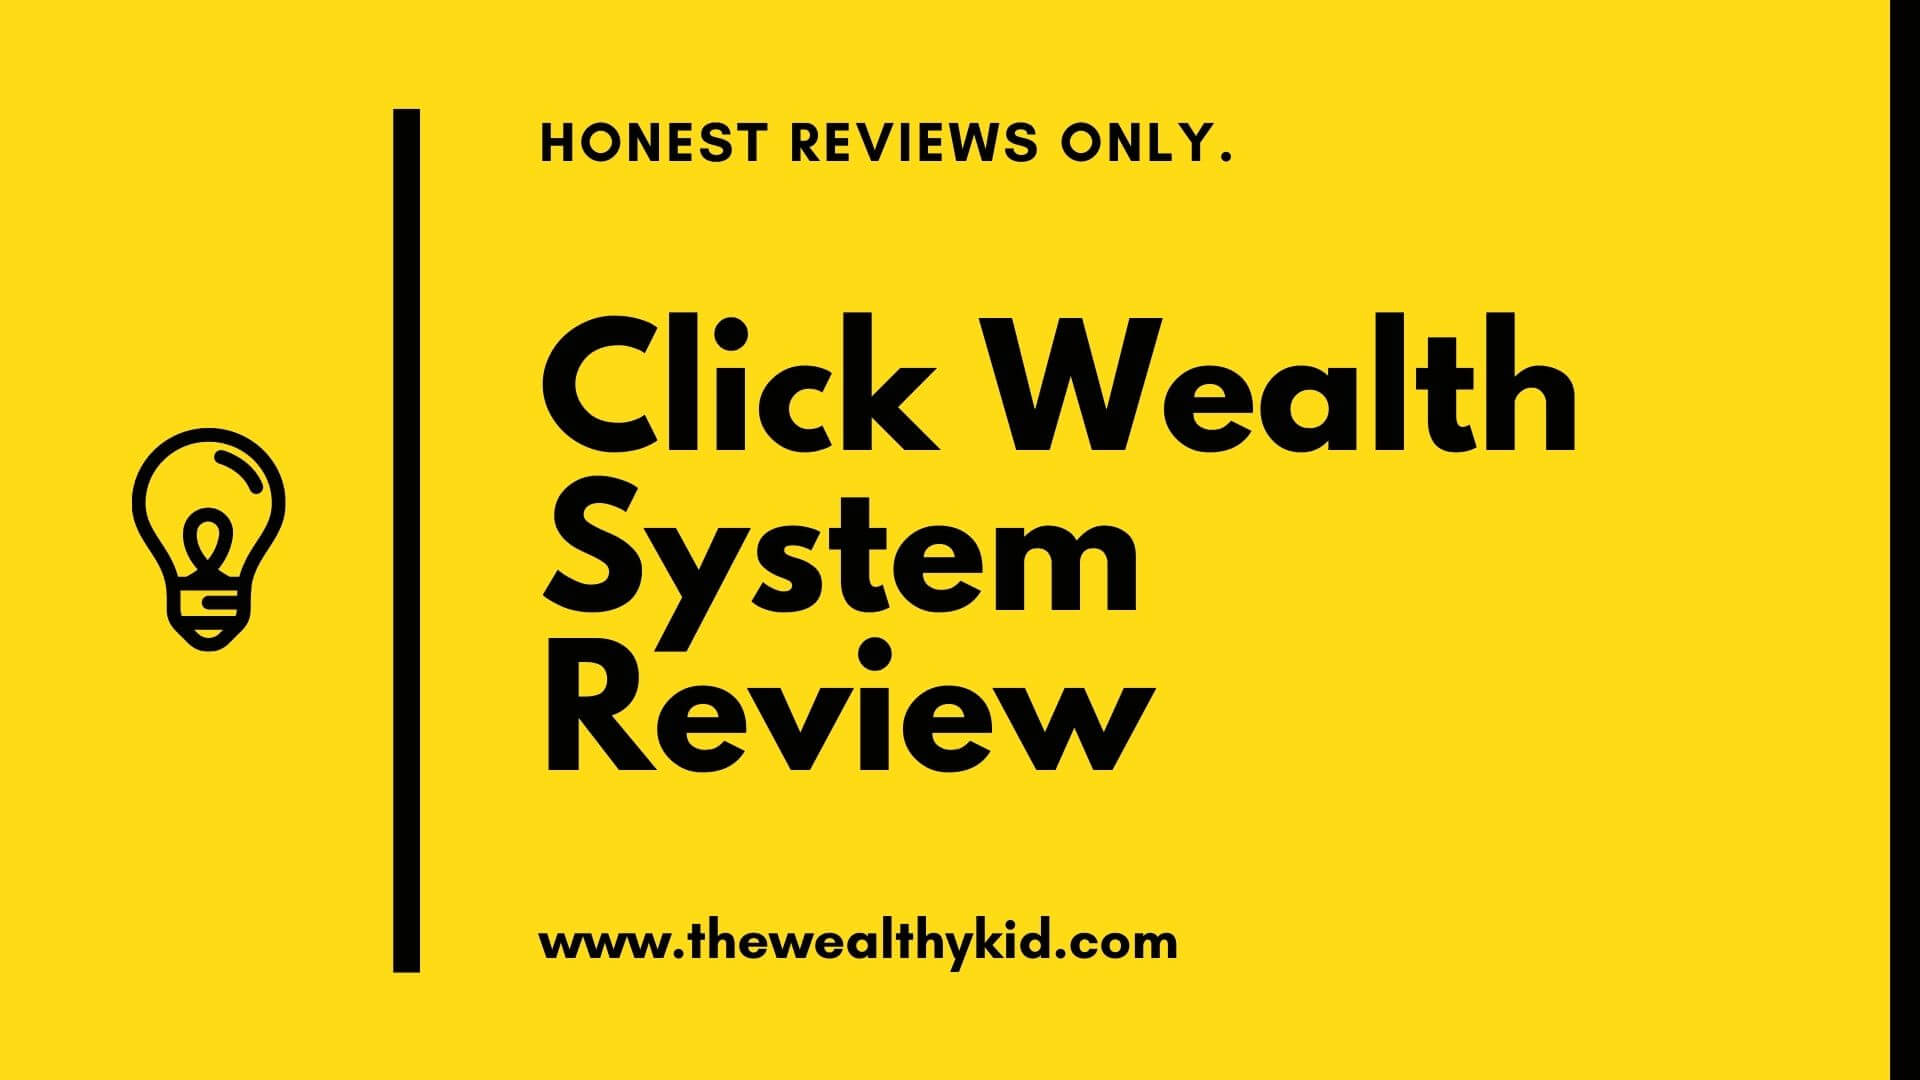 Click Wealth System Reviews- Ugly Truths about this system